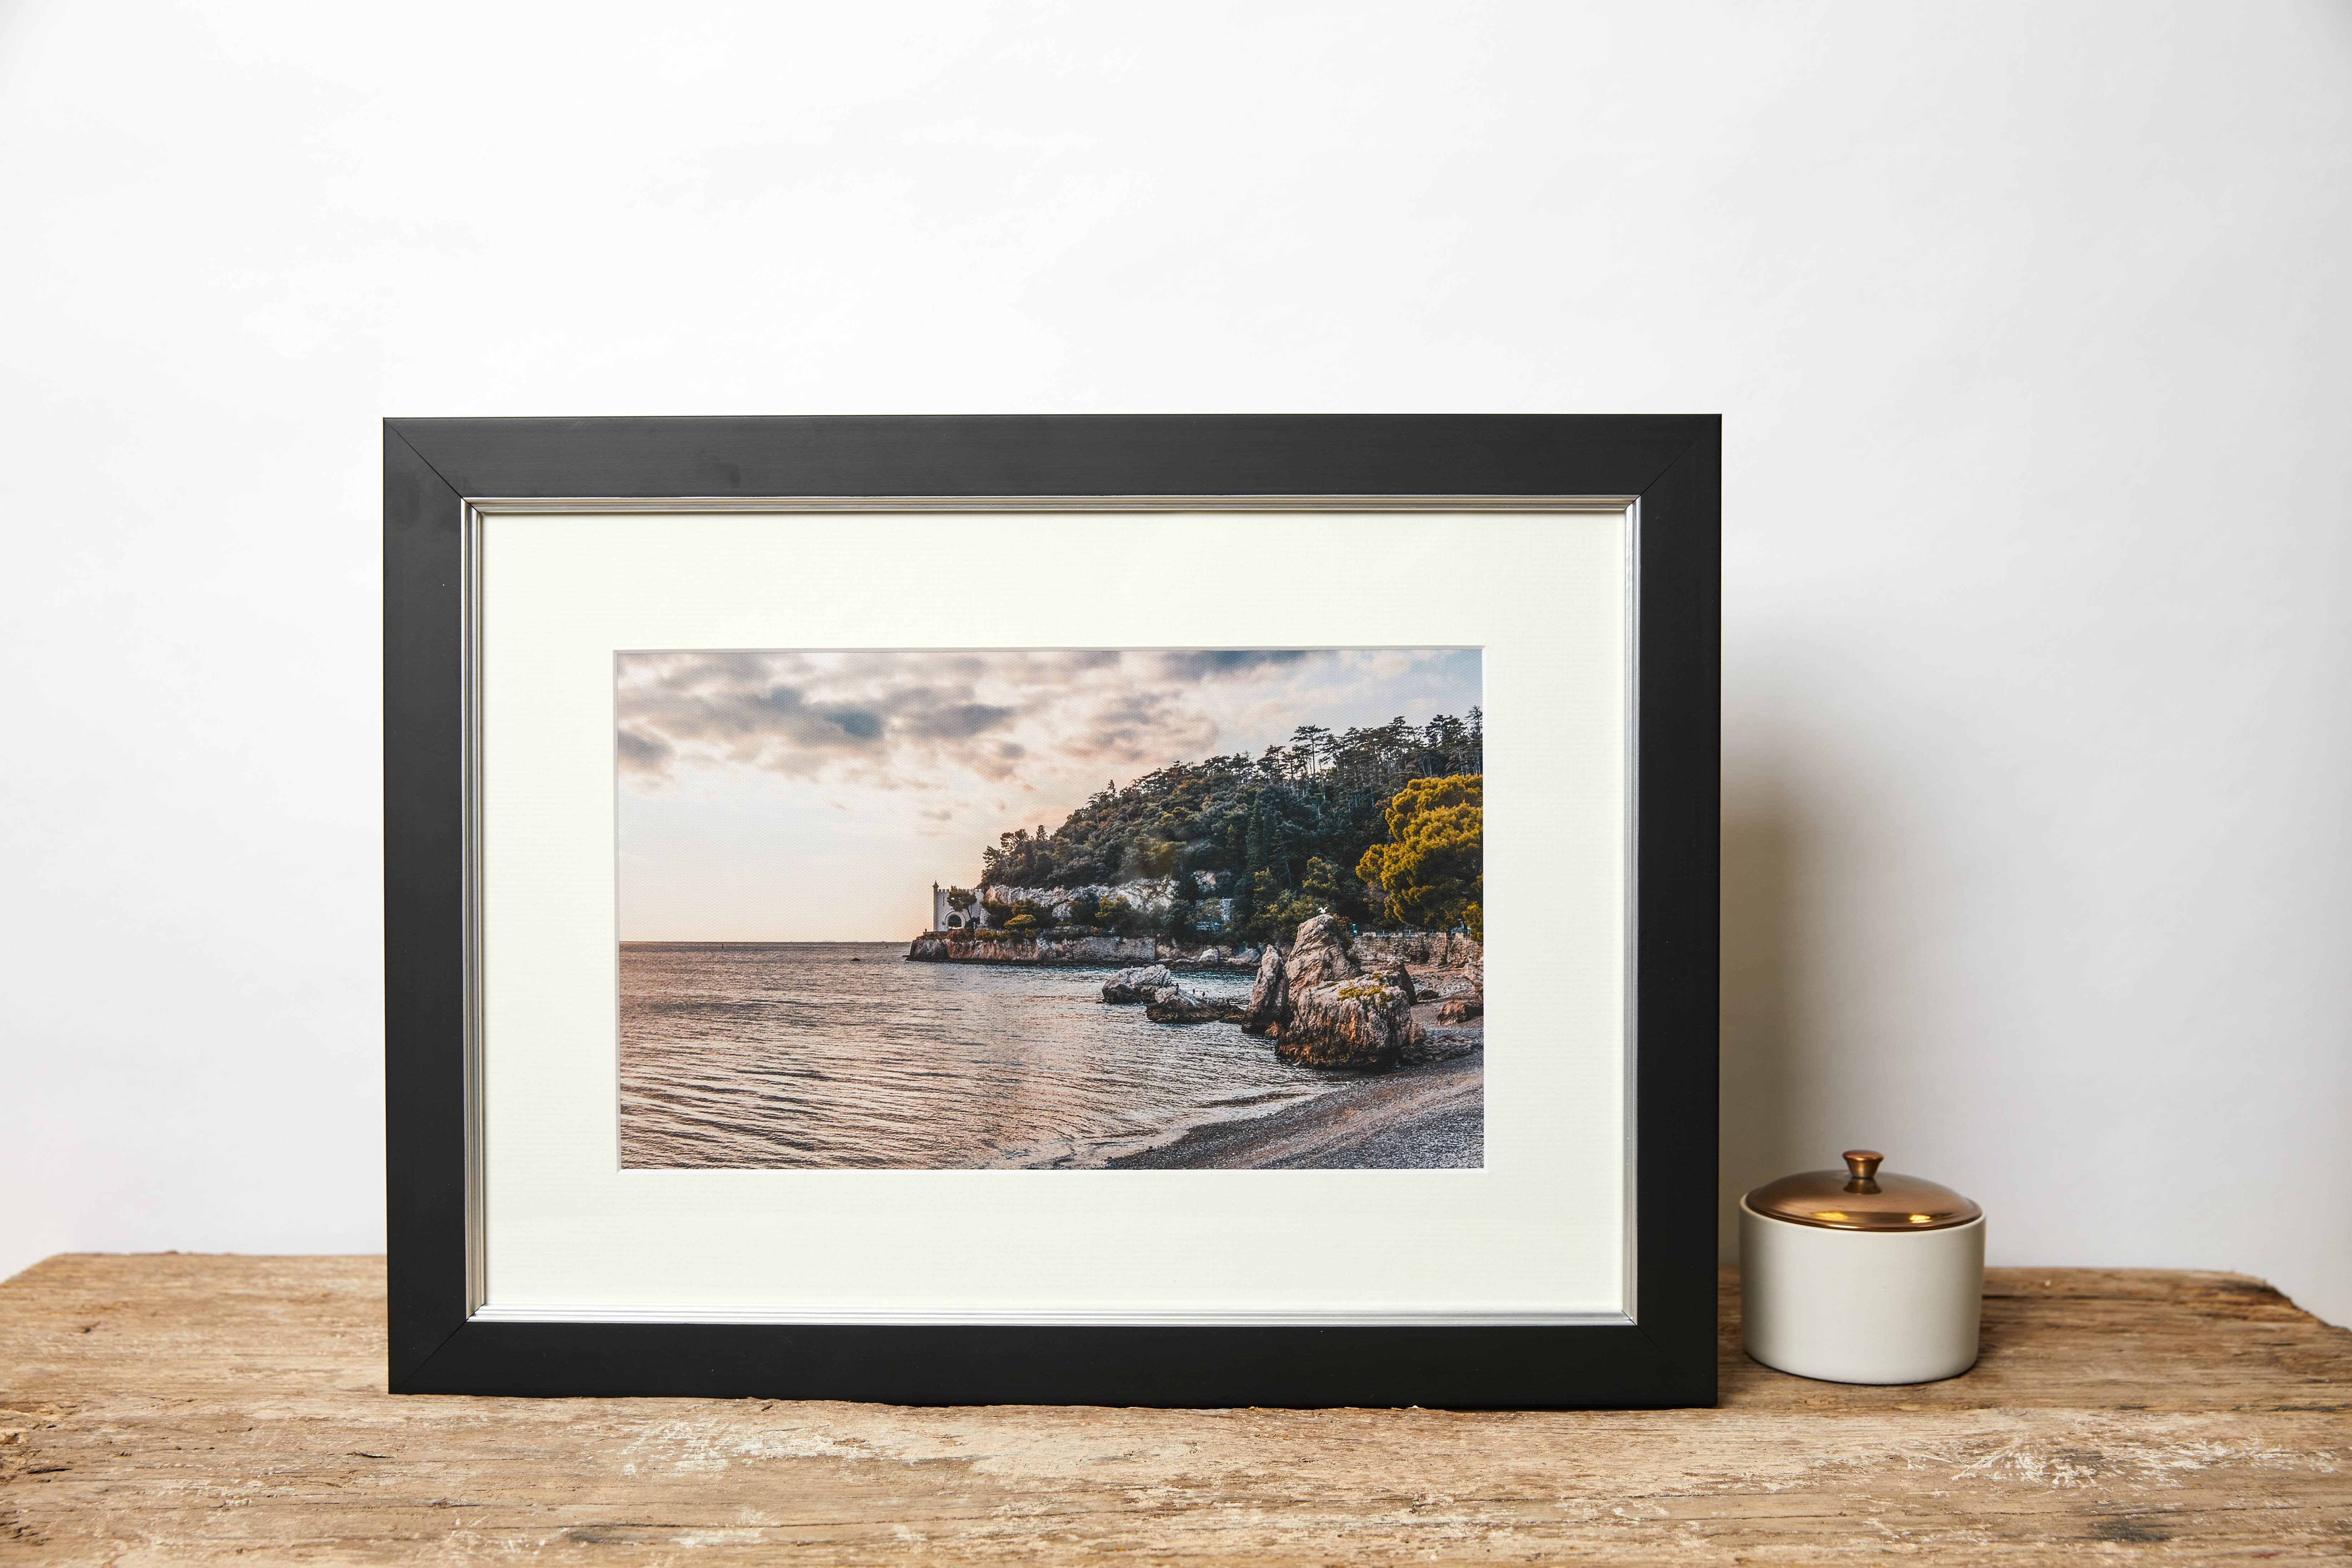 Create your own personalised wall prints with our custom picture frames for affordable prices